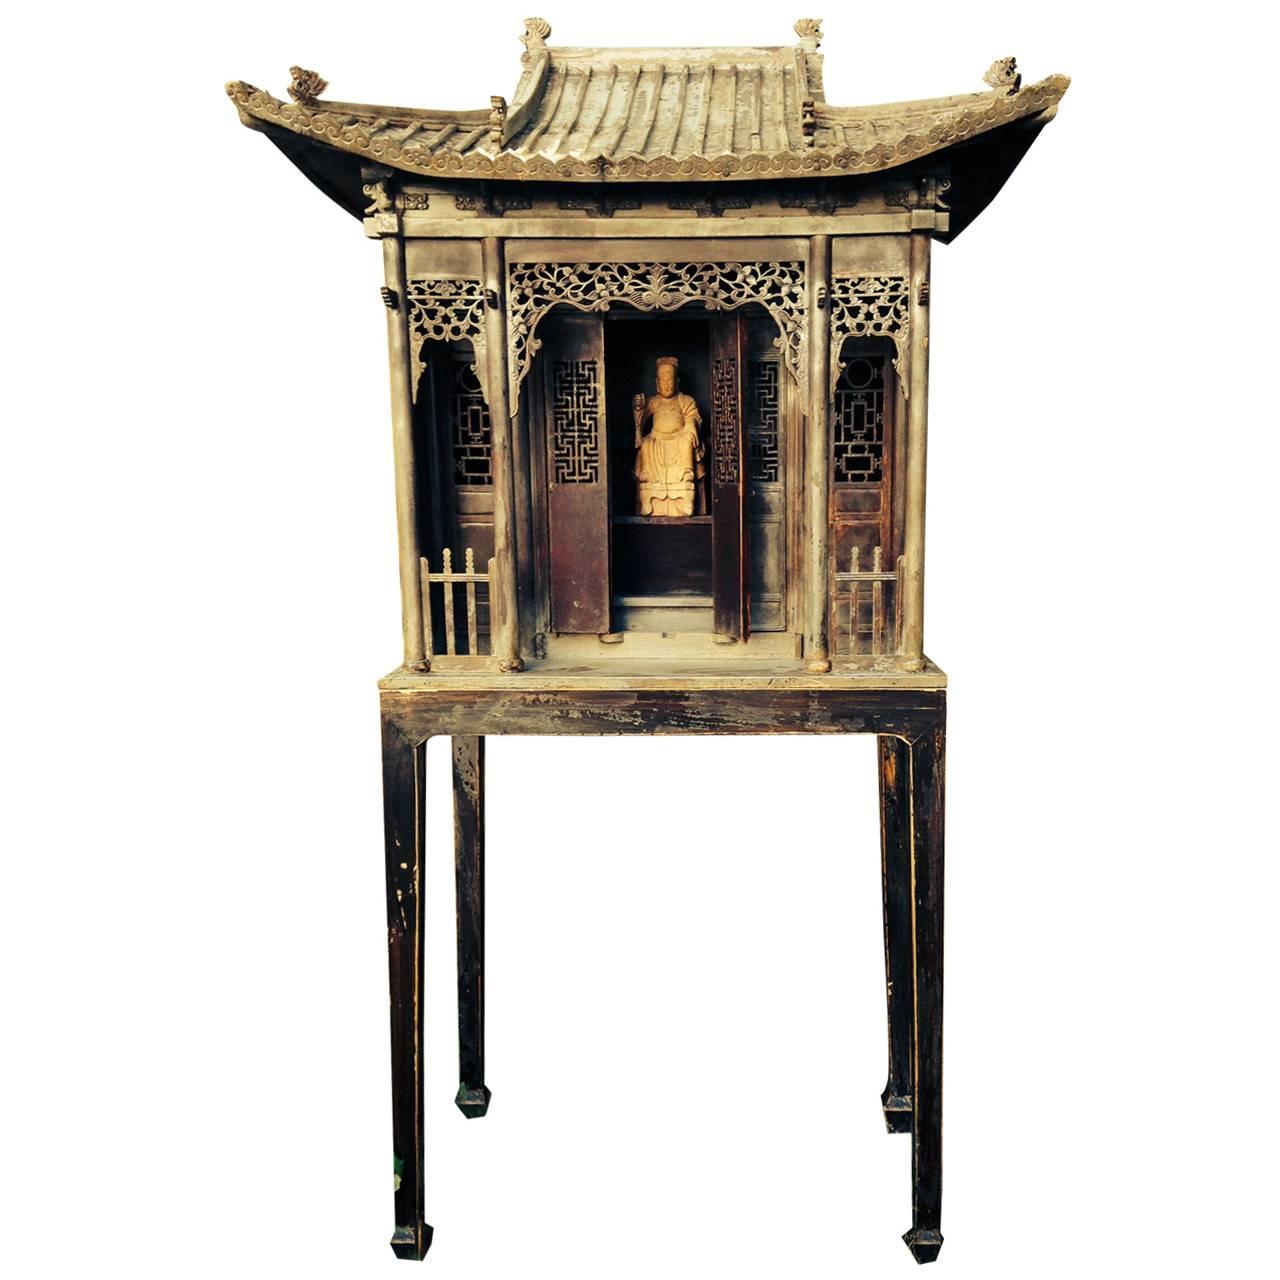  Chinese Important Antique Hand carved Wooden Shrine, Qing dynasty 1644-1912  